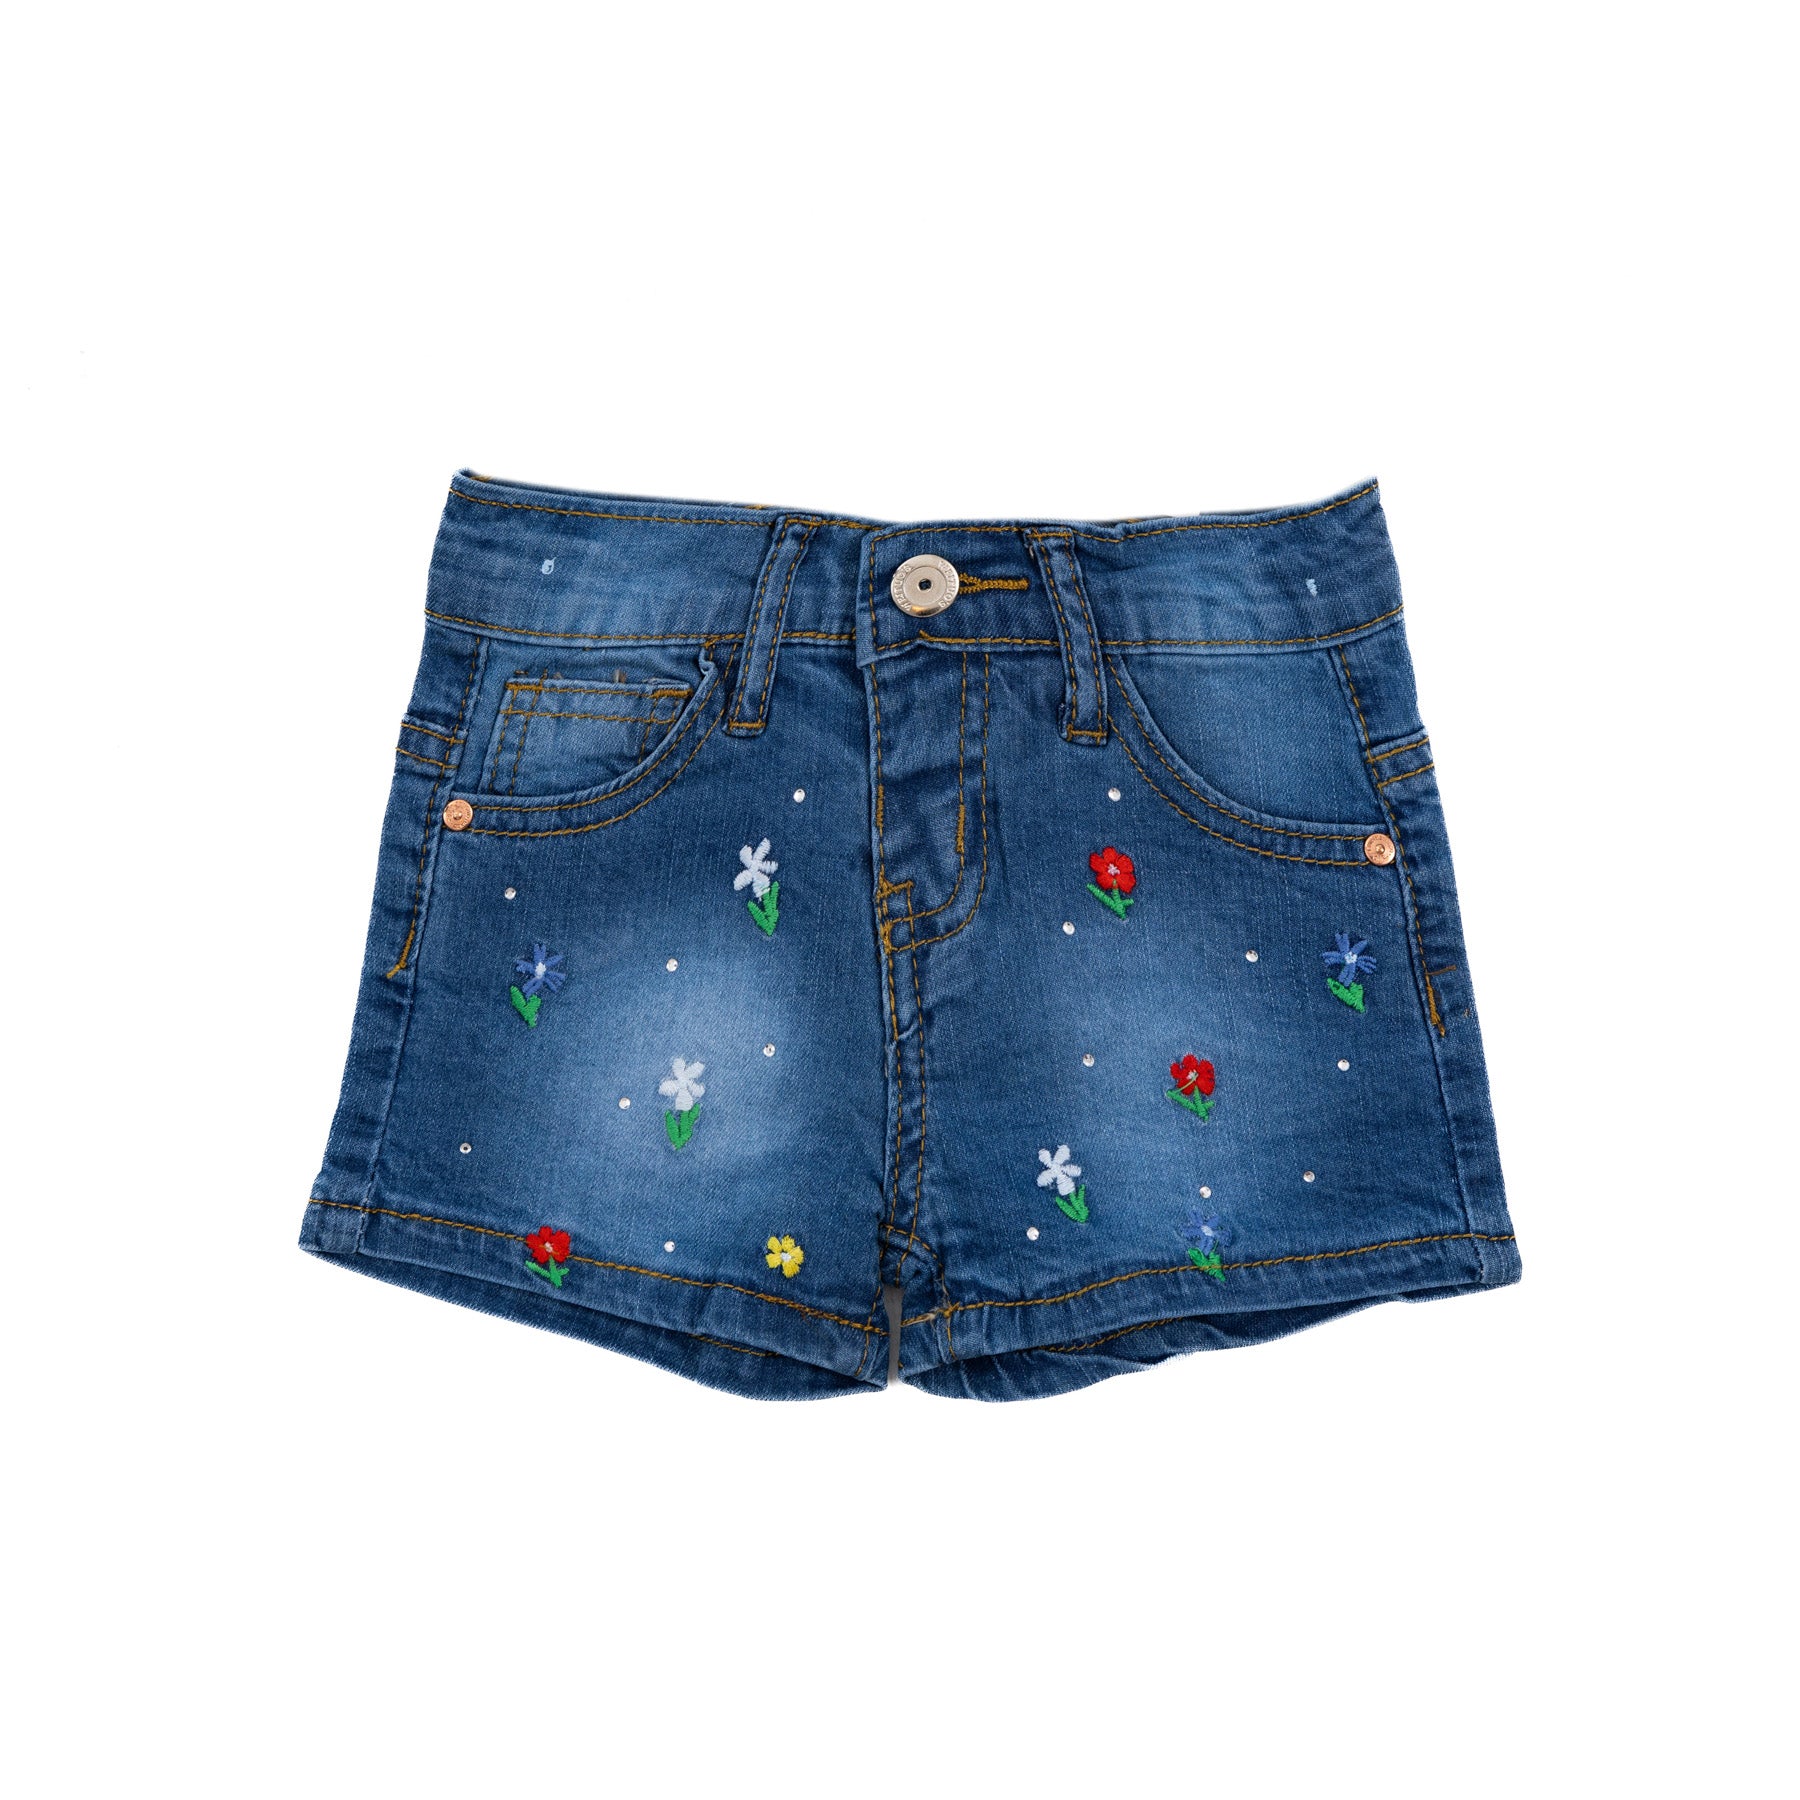 dark blue jeans hot short with all over stitching